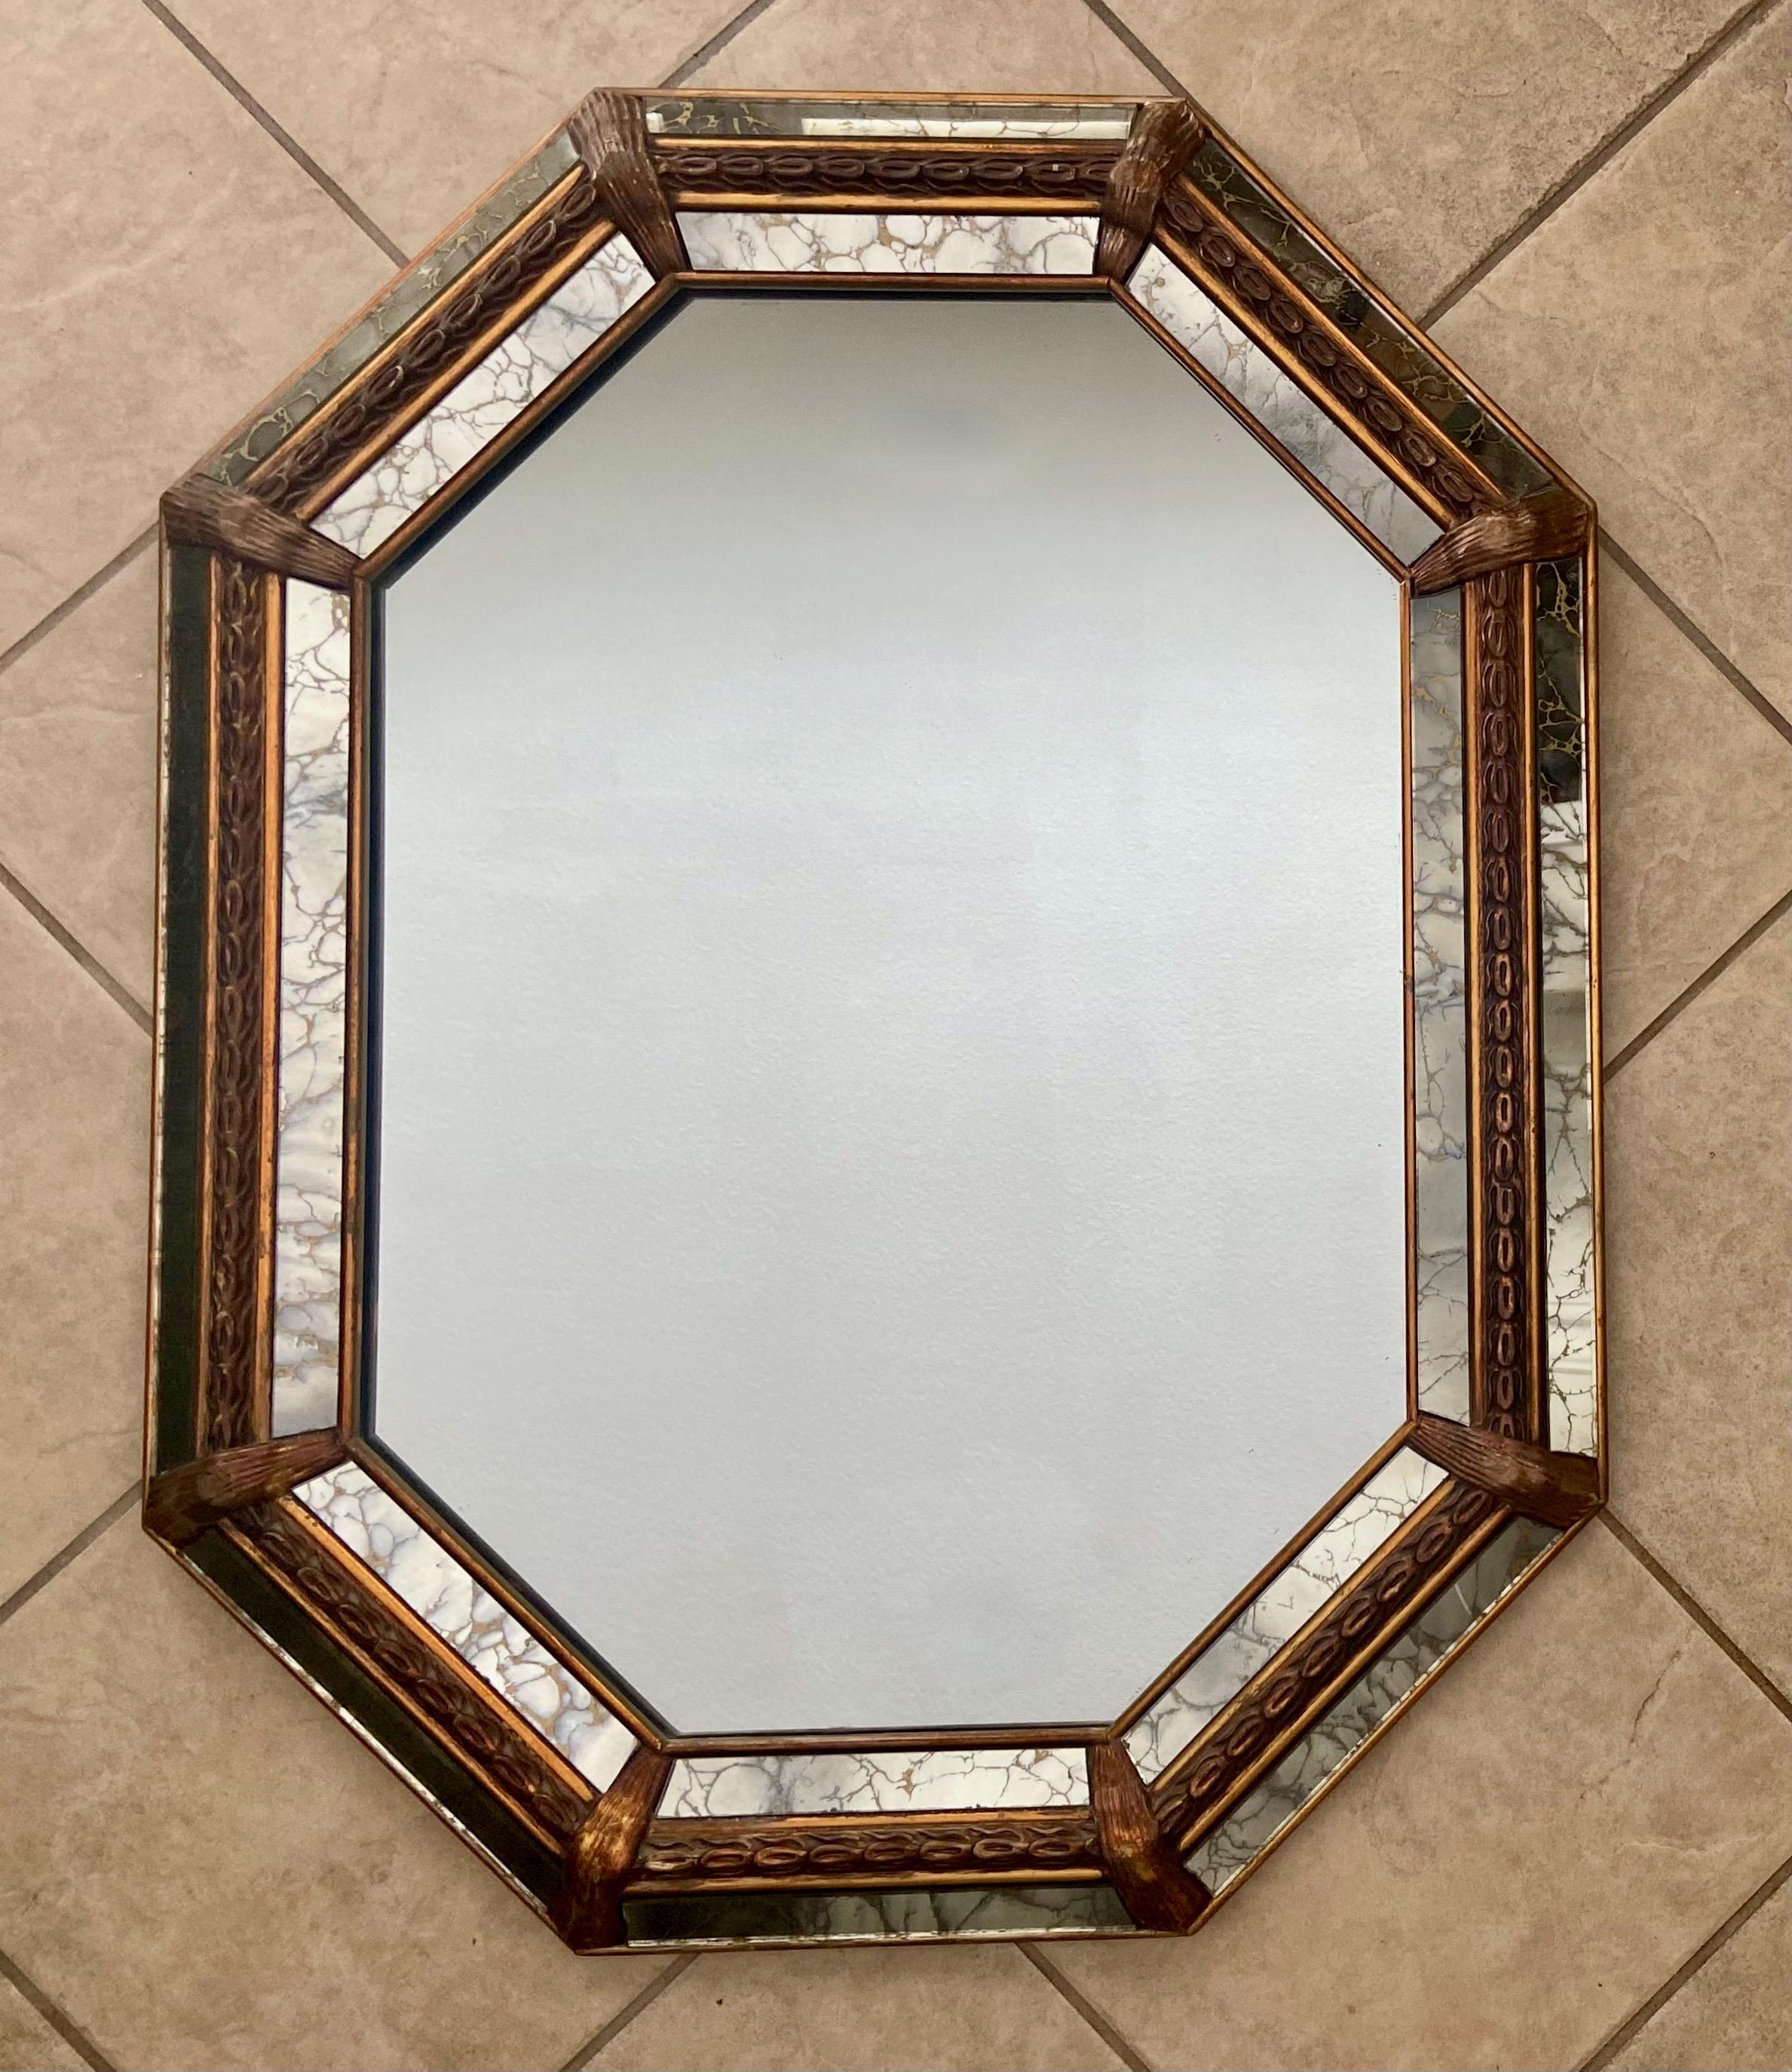 Venetian style 8 sided gilt wood wall mirror, accented with raised decorative carvings and gold vein mirror panels. A wonderfully crafted Hollywood Regency mid-century period wall mirror.
  